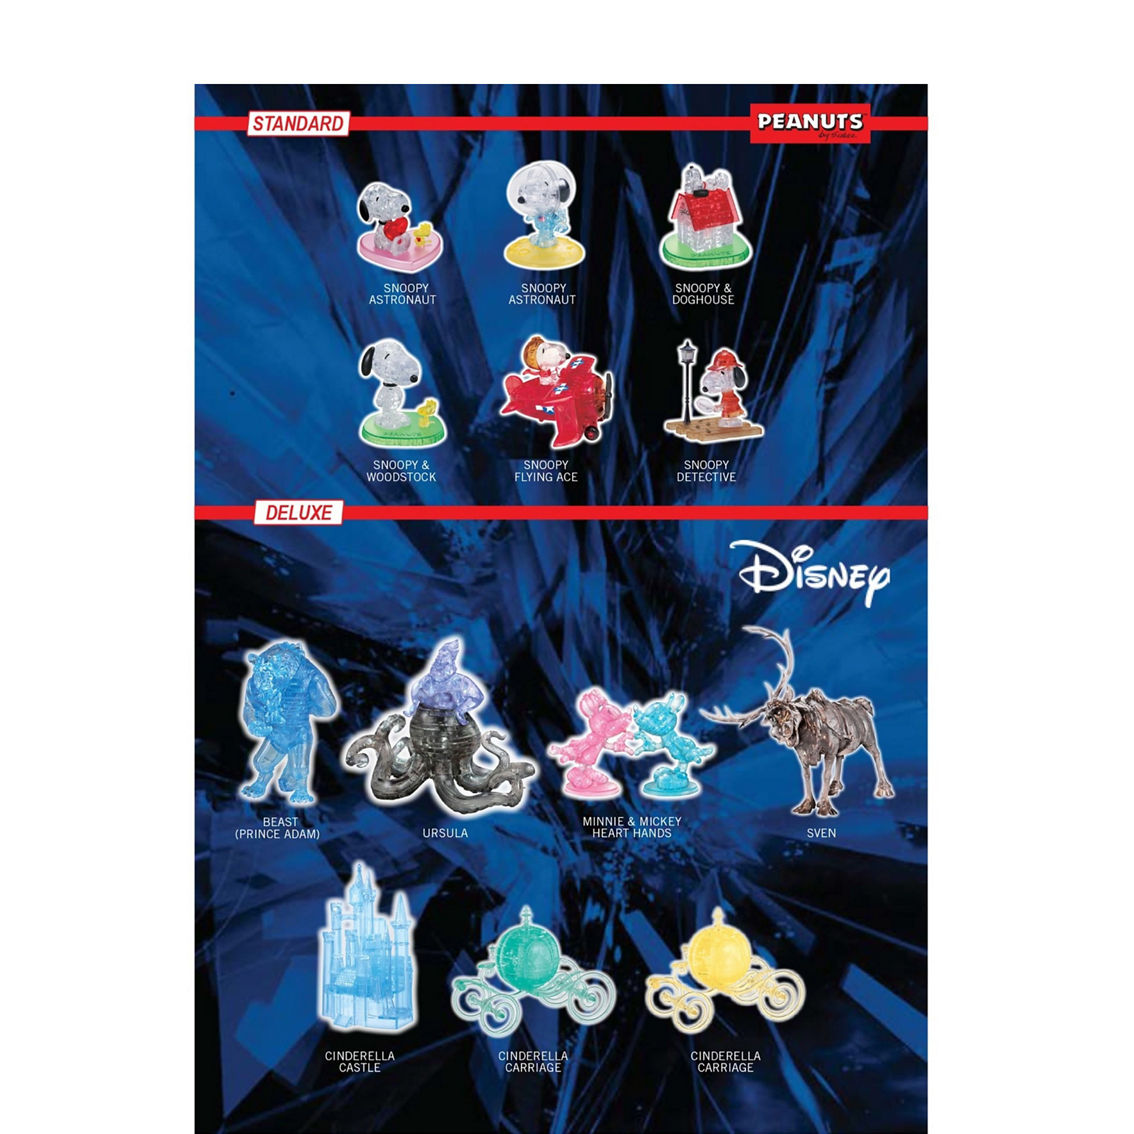 BePuzzled 3D Crystal Puzzle - Disney Peter Pan (Green): 34 Pcs - Image 4 of 5